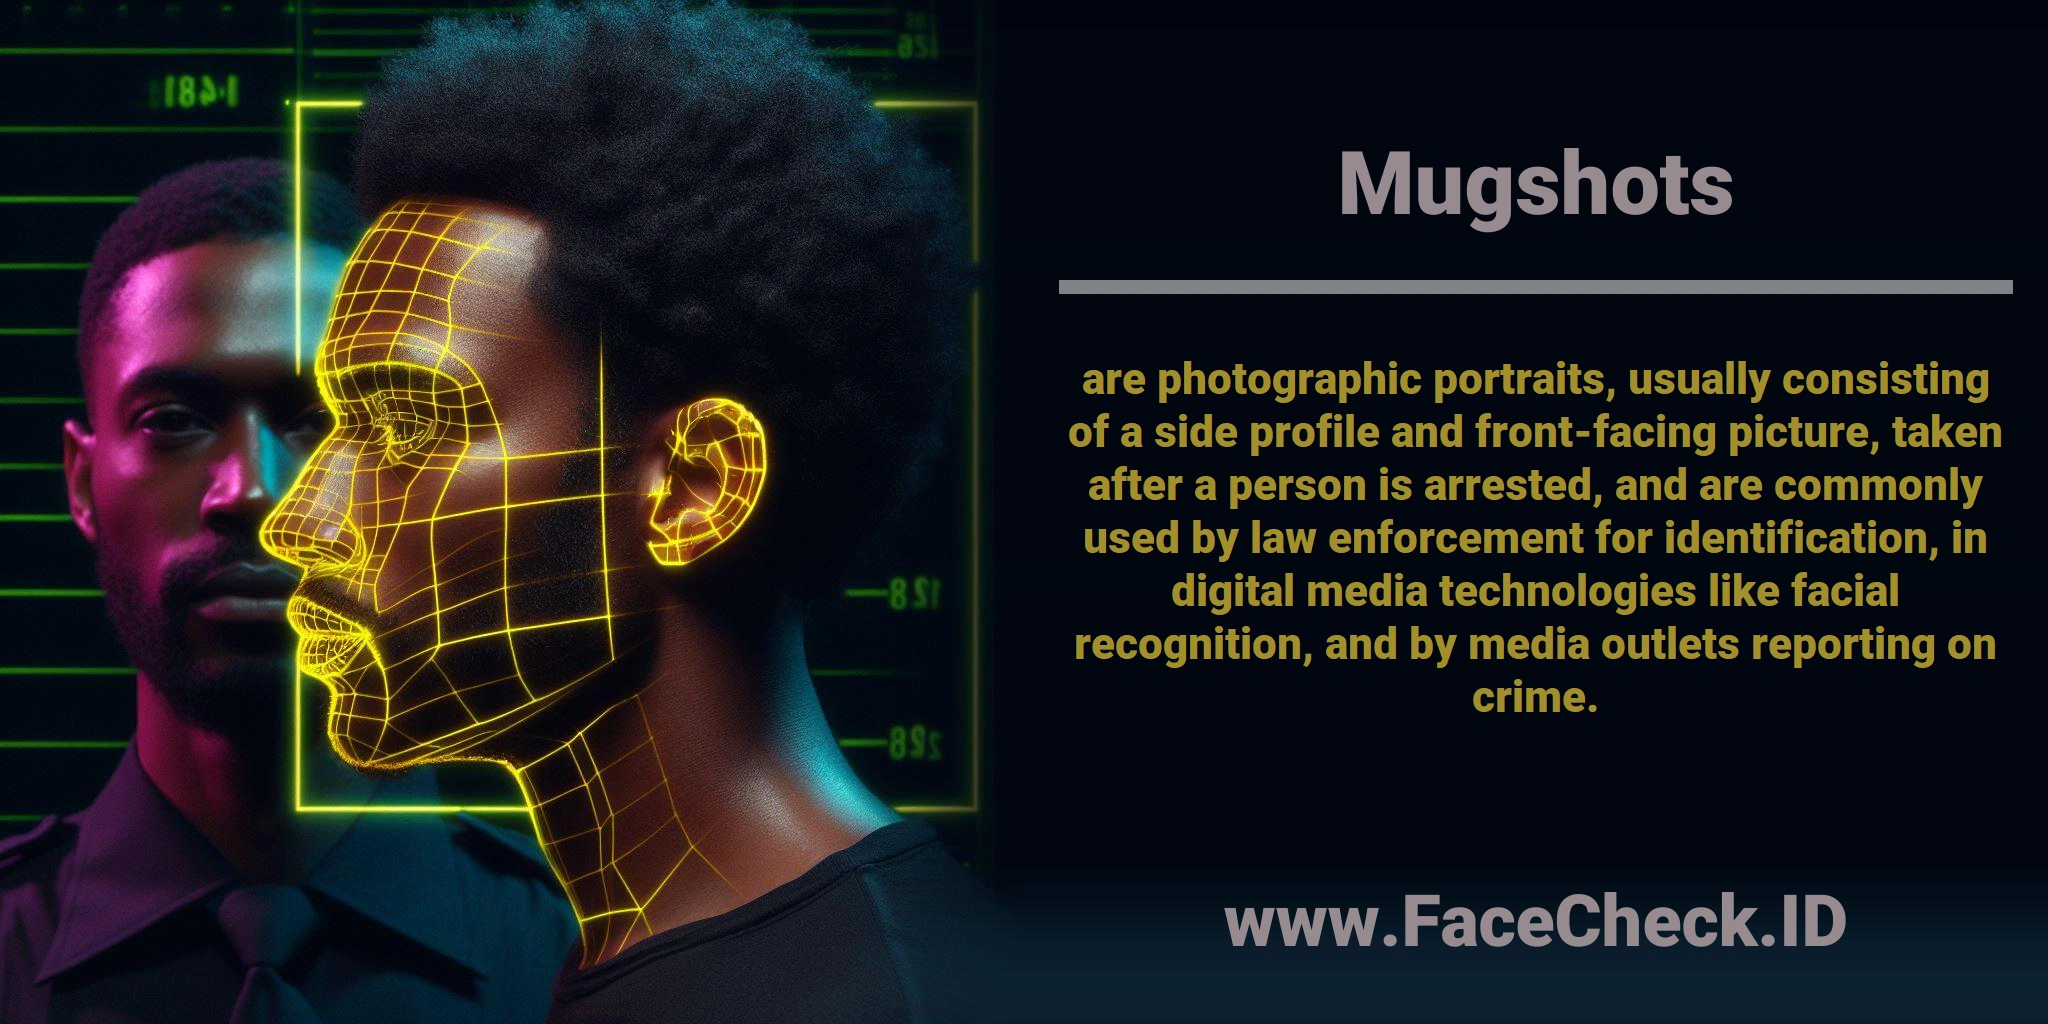 <b>Mugshots</b> are photographic portraits, usually consisting of a side profile and front-facing picture, taken after a person is arrested, and are commonly used by law enforcement for identification, in digital media technologies like facial recognition, and by media outlets reporting on crime.